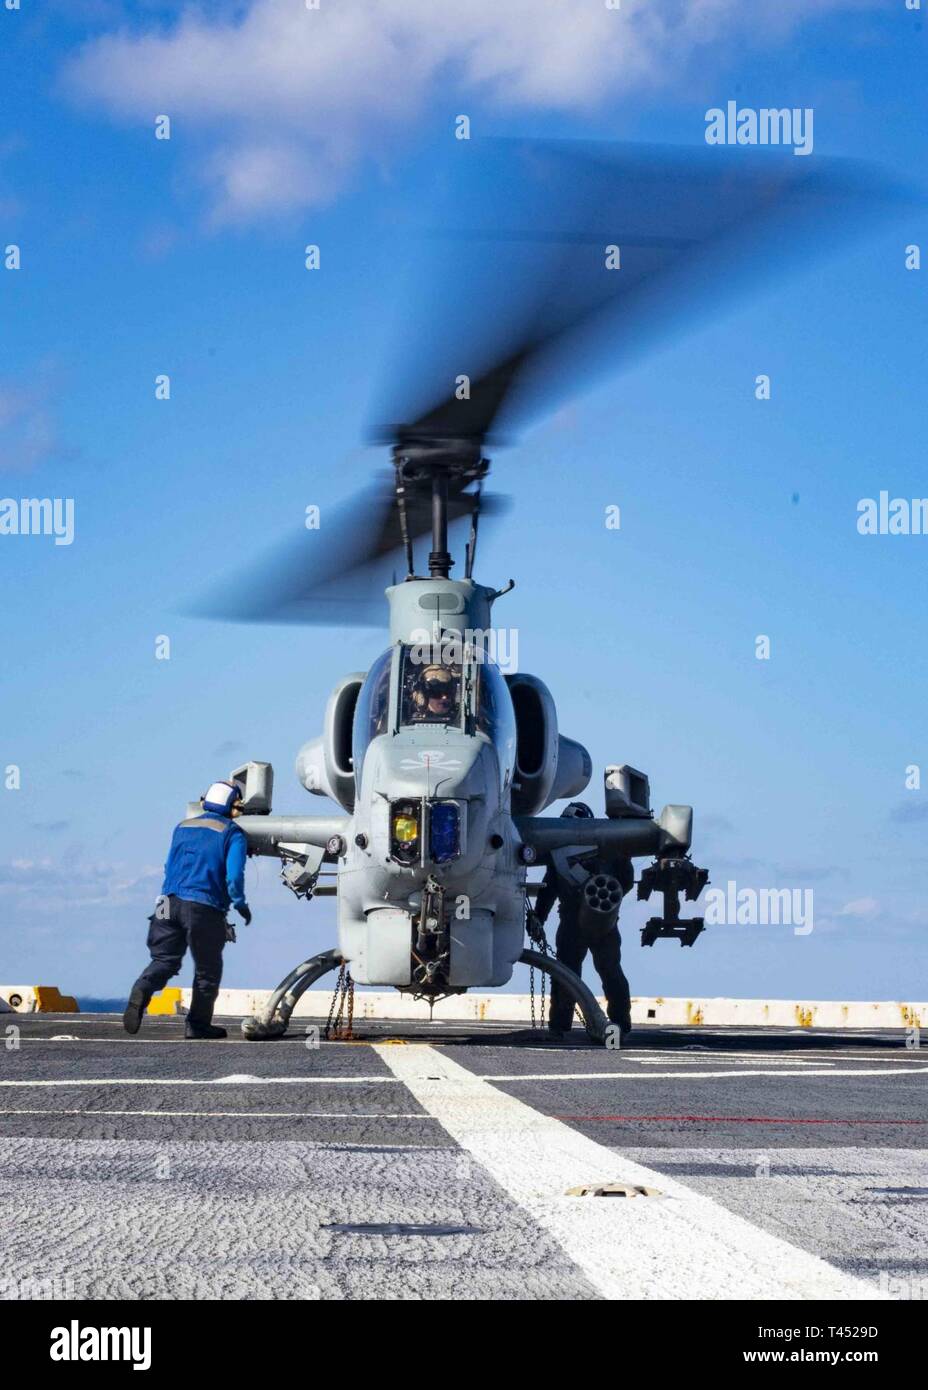 MEDITERRANEAN SEA (Feb. 26, 2019) Sailors remove chains on an AH-1W Super Cobra helicopter assigned to the “Black Knights” of Marine Medium Tiltrotor Squadron (VMM) 264 (Reinforced) on the flight deck of the San Antonio-class amphibious transport dock ship USS Arlington (LPD 24), Feb. 26, 2019. Arlington is on a scheduled deployment as part of the Kearsarge Amphibious Ready Group in support of maritime security operations, crisis response and theater security cooperation, while also providing a forward naval presence. Stock Photo